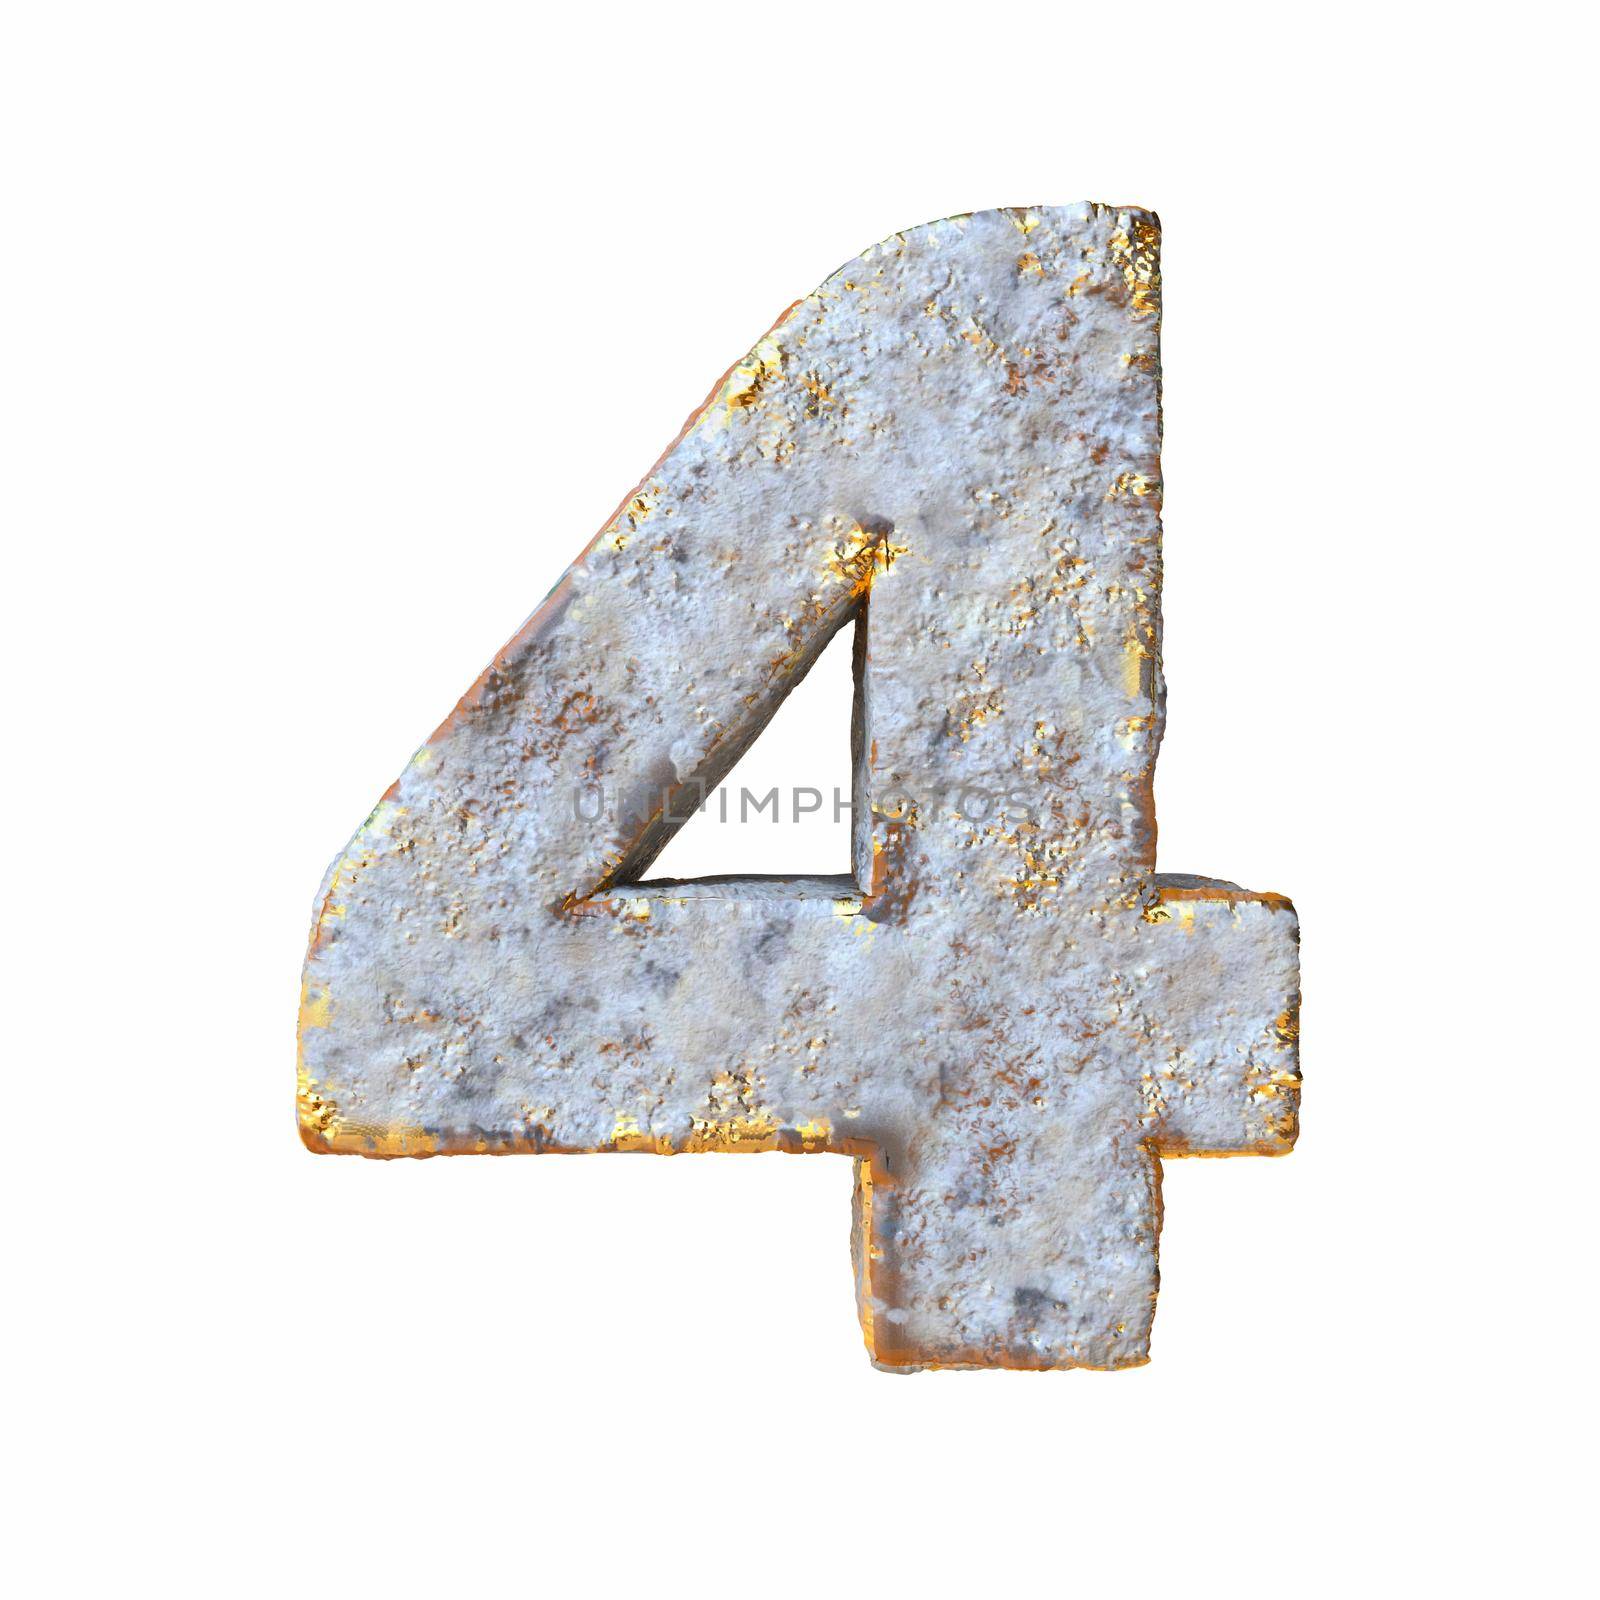 Stone with golden metal particles Number 4 FOUR 3D rendering illustration isolated on white background